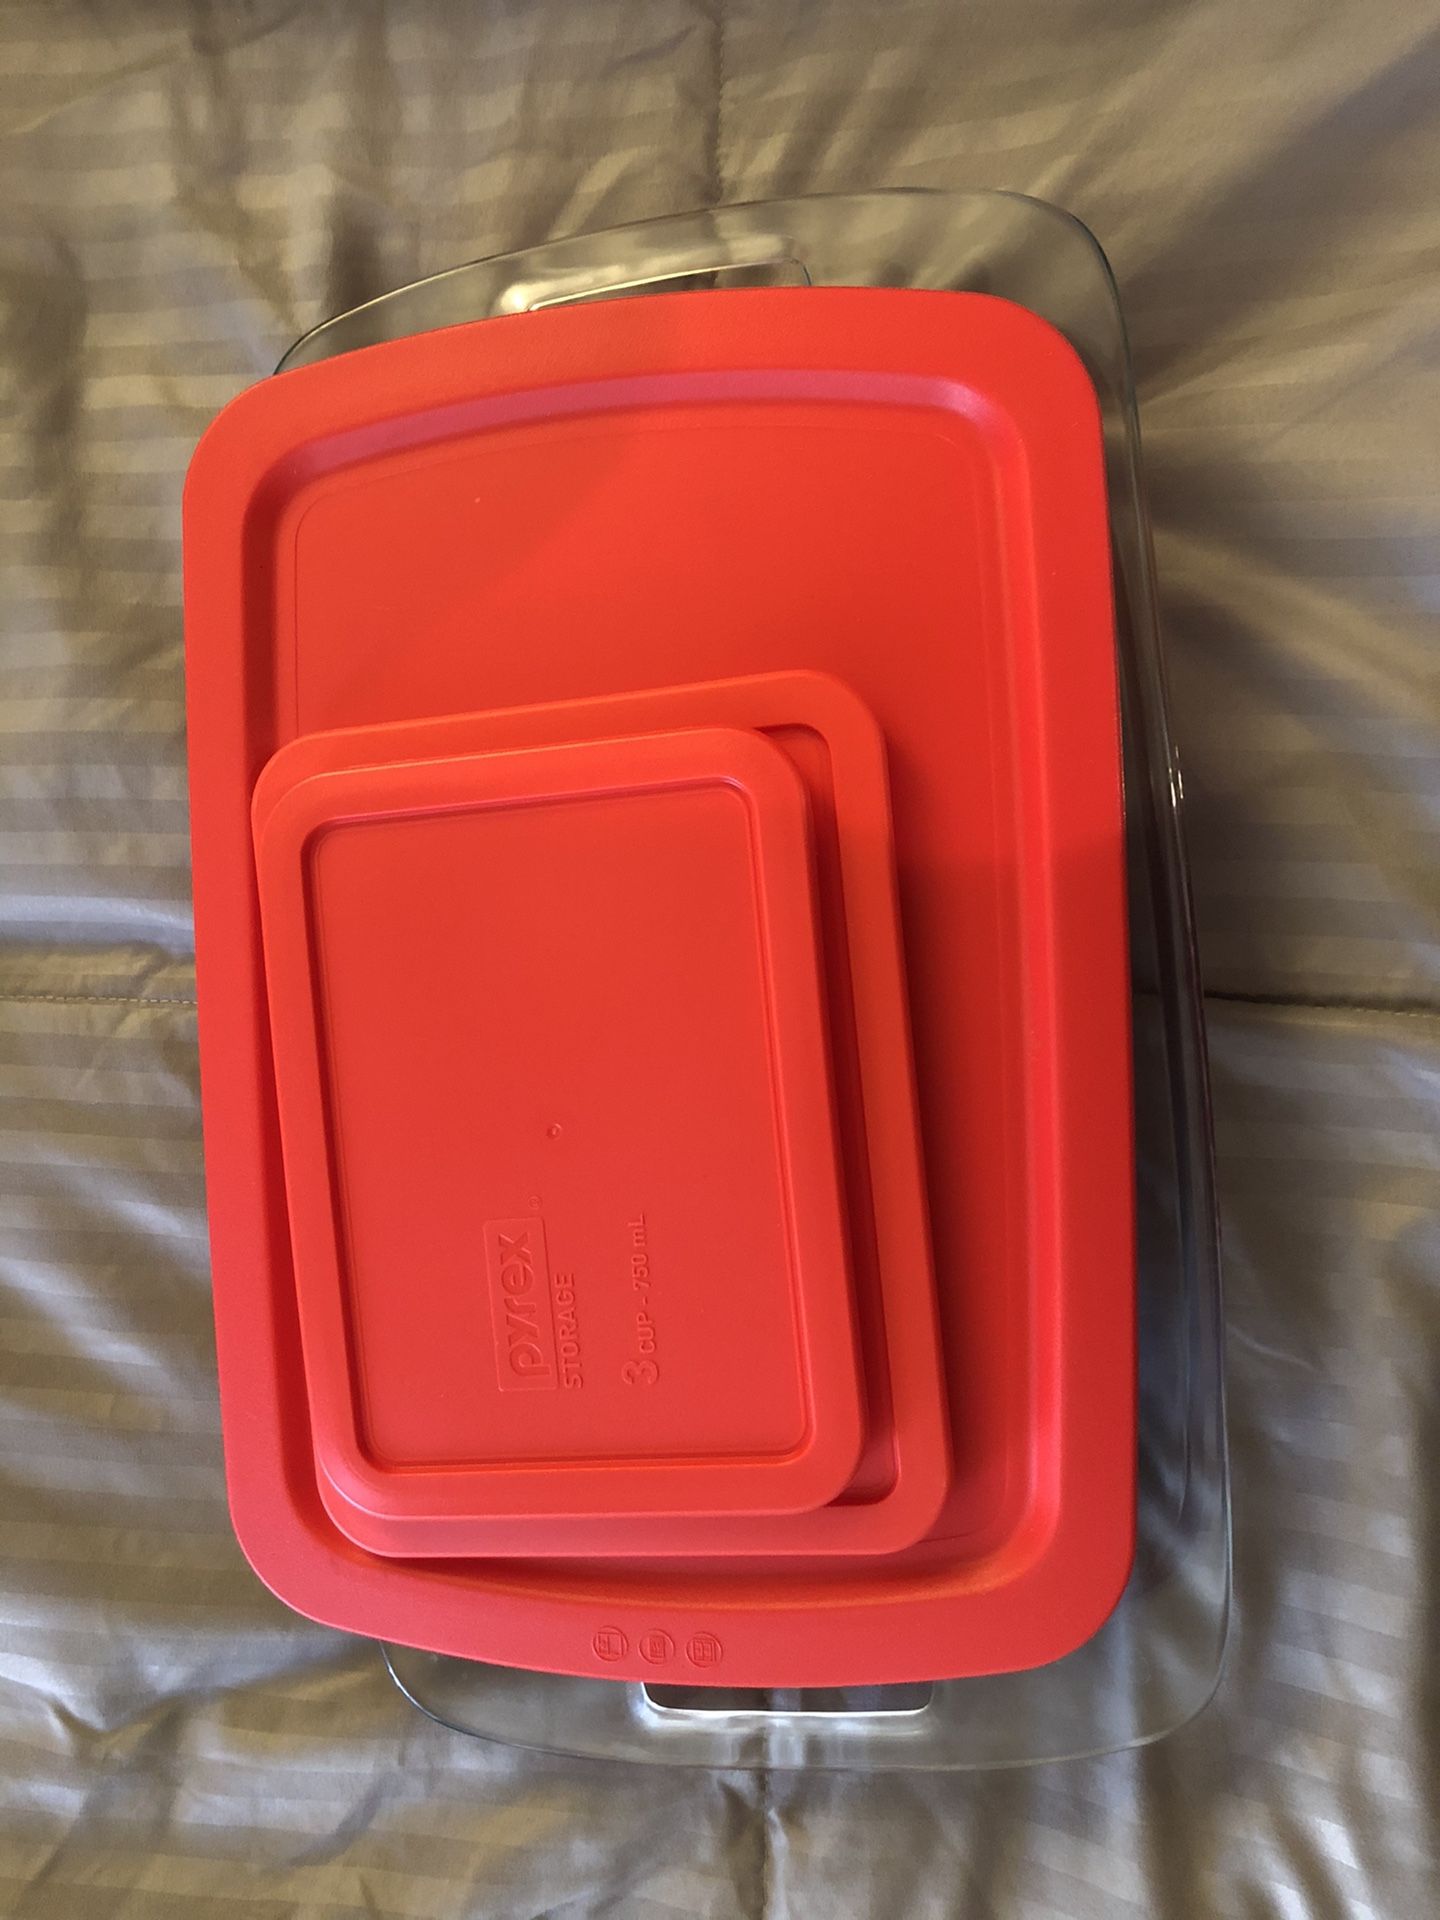 3 sizes of Pyrex baking dishes with covers